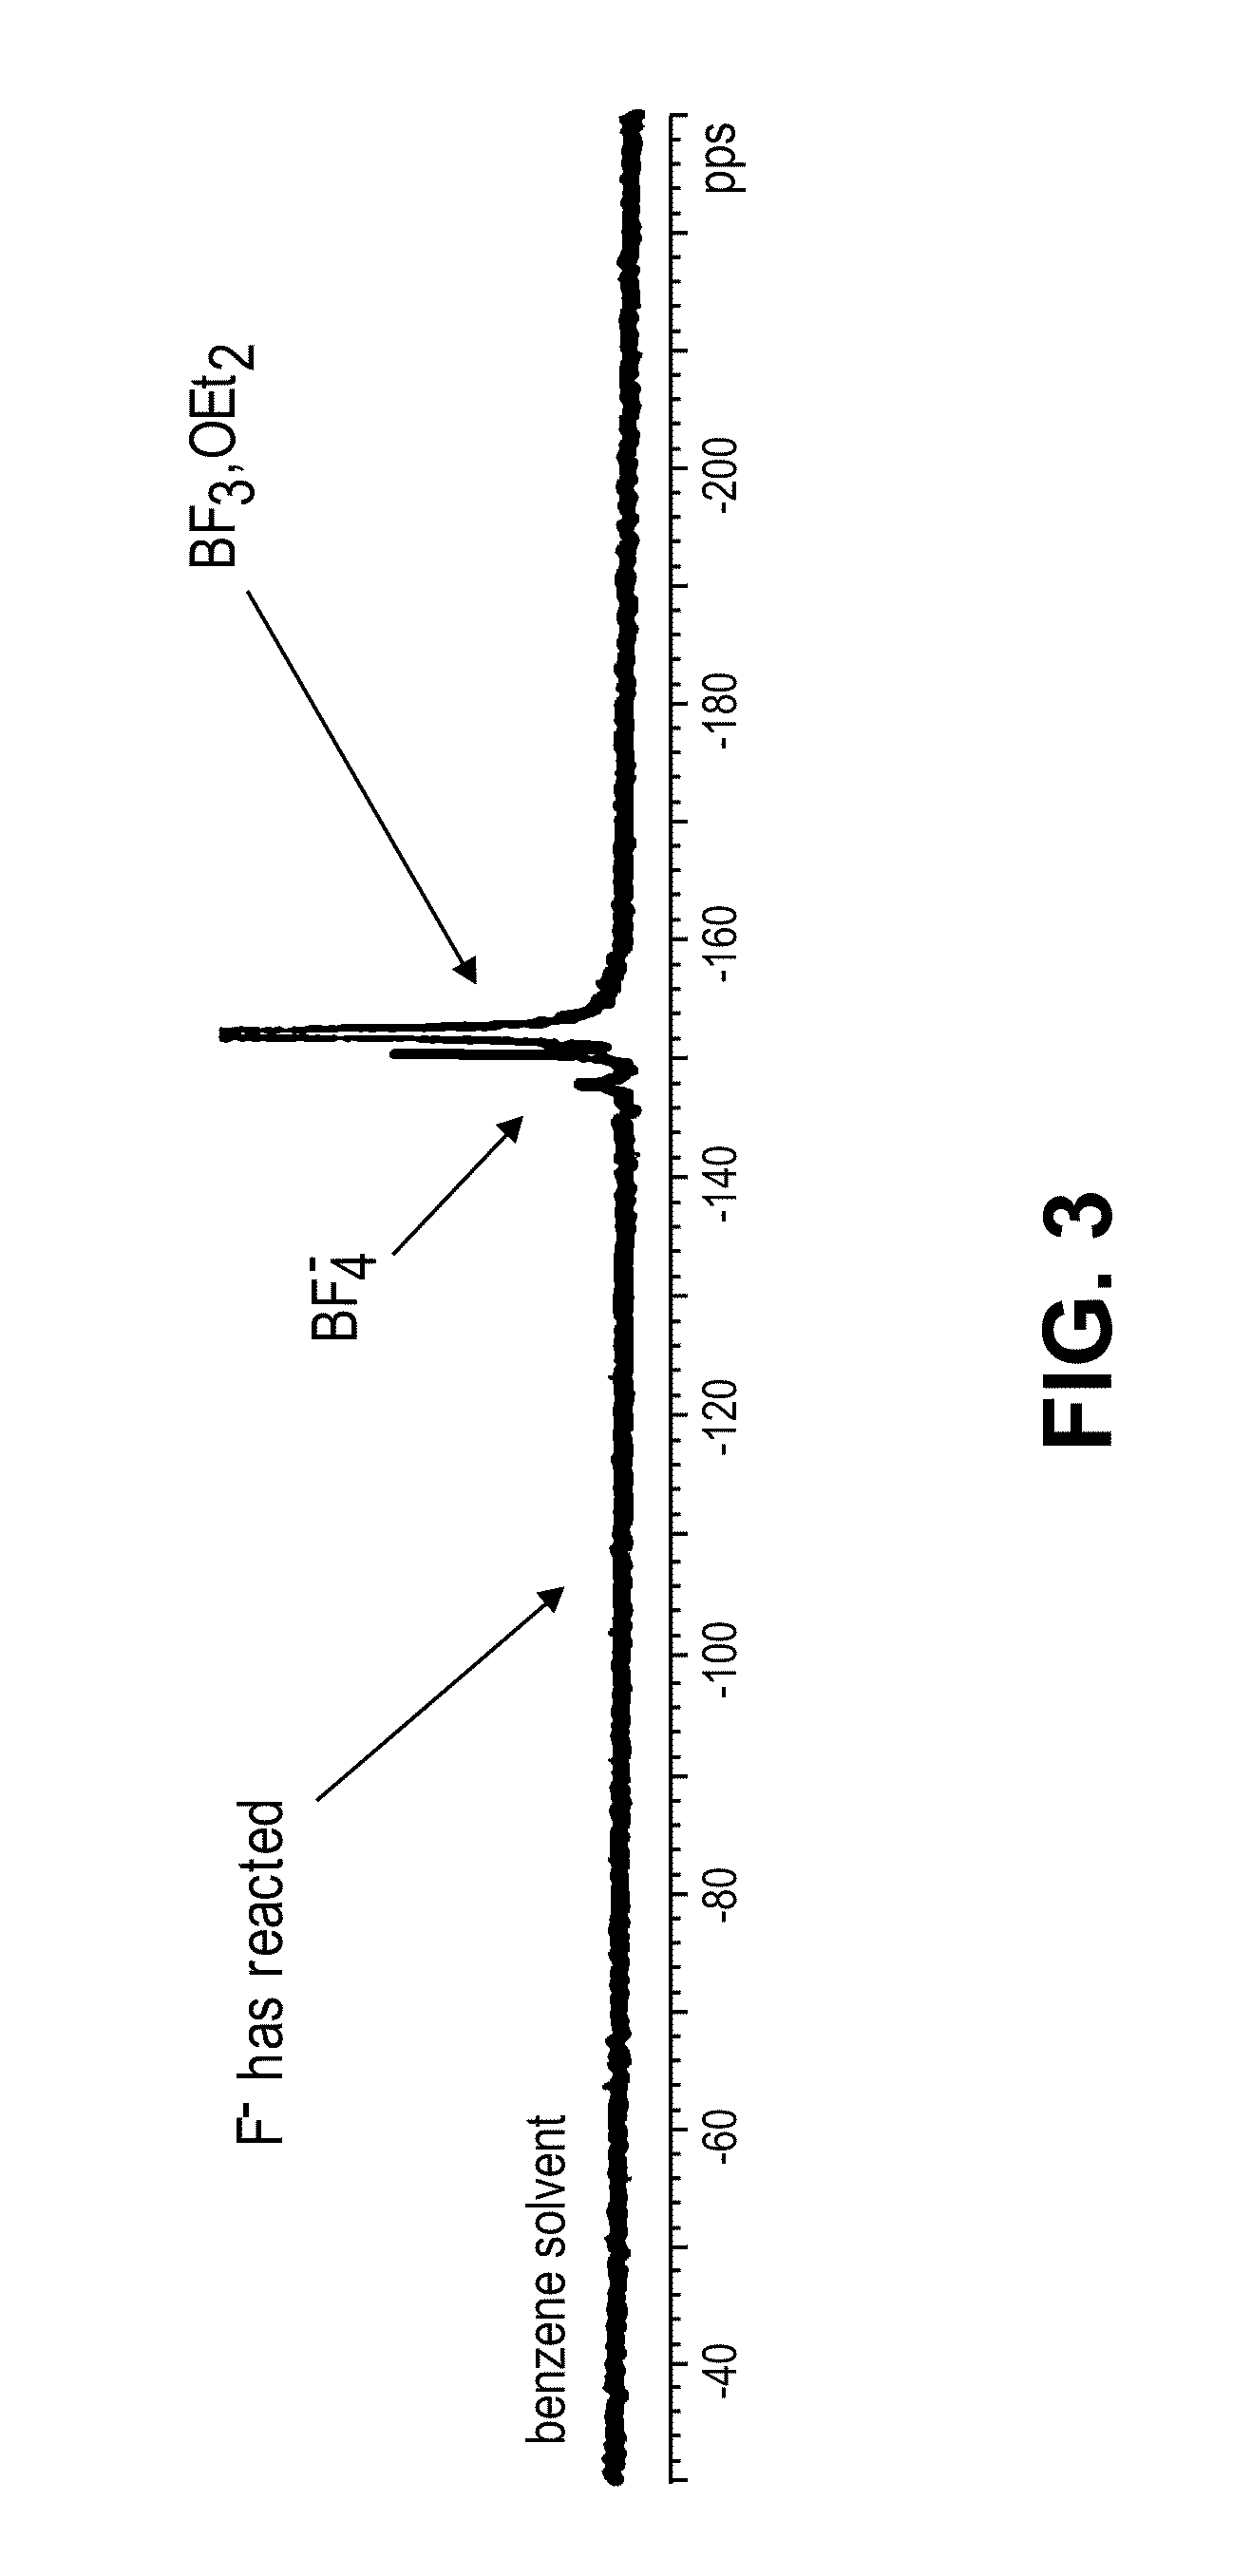 Fluoride ion battery electrolyte compositions